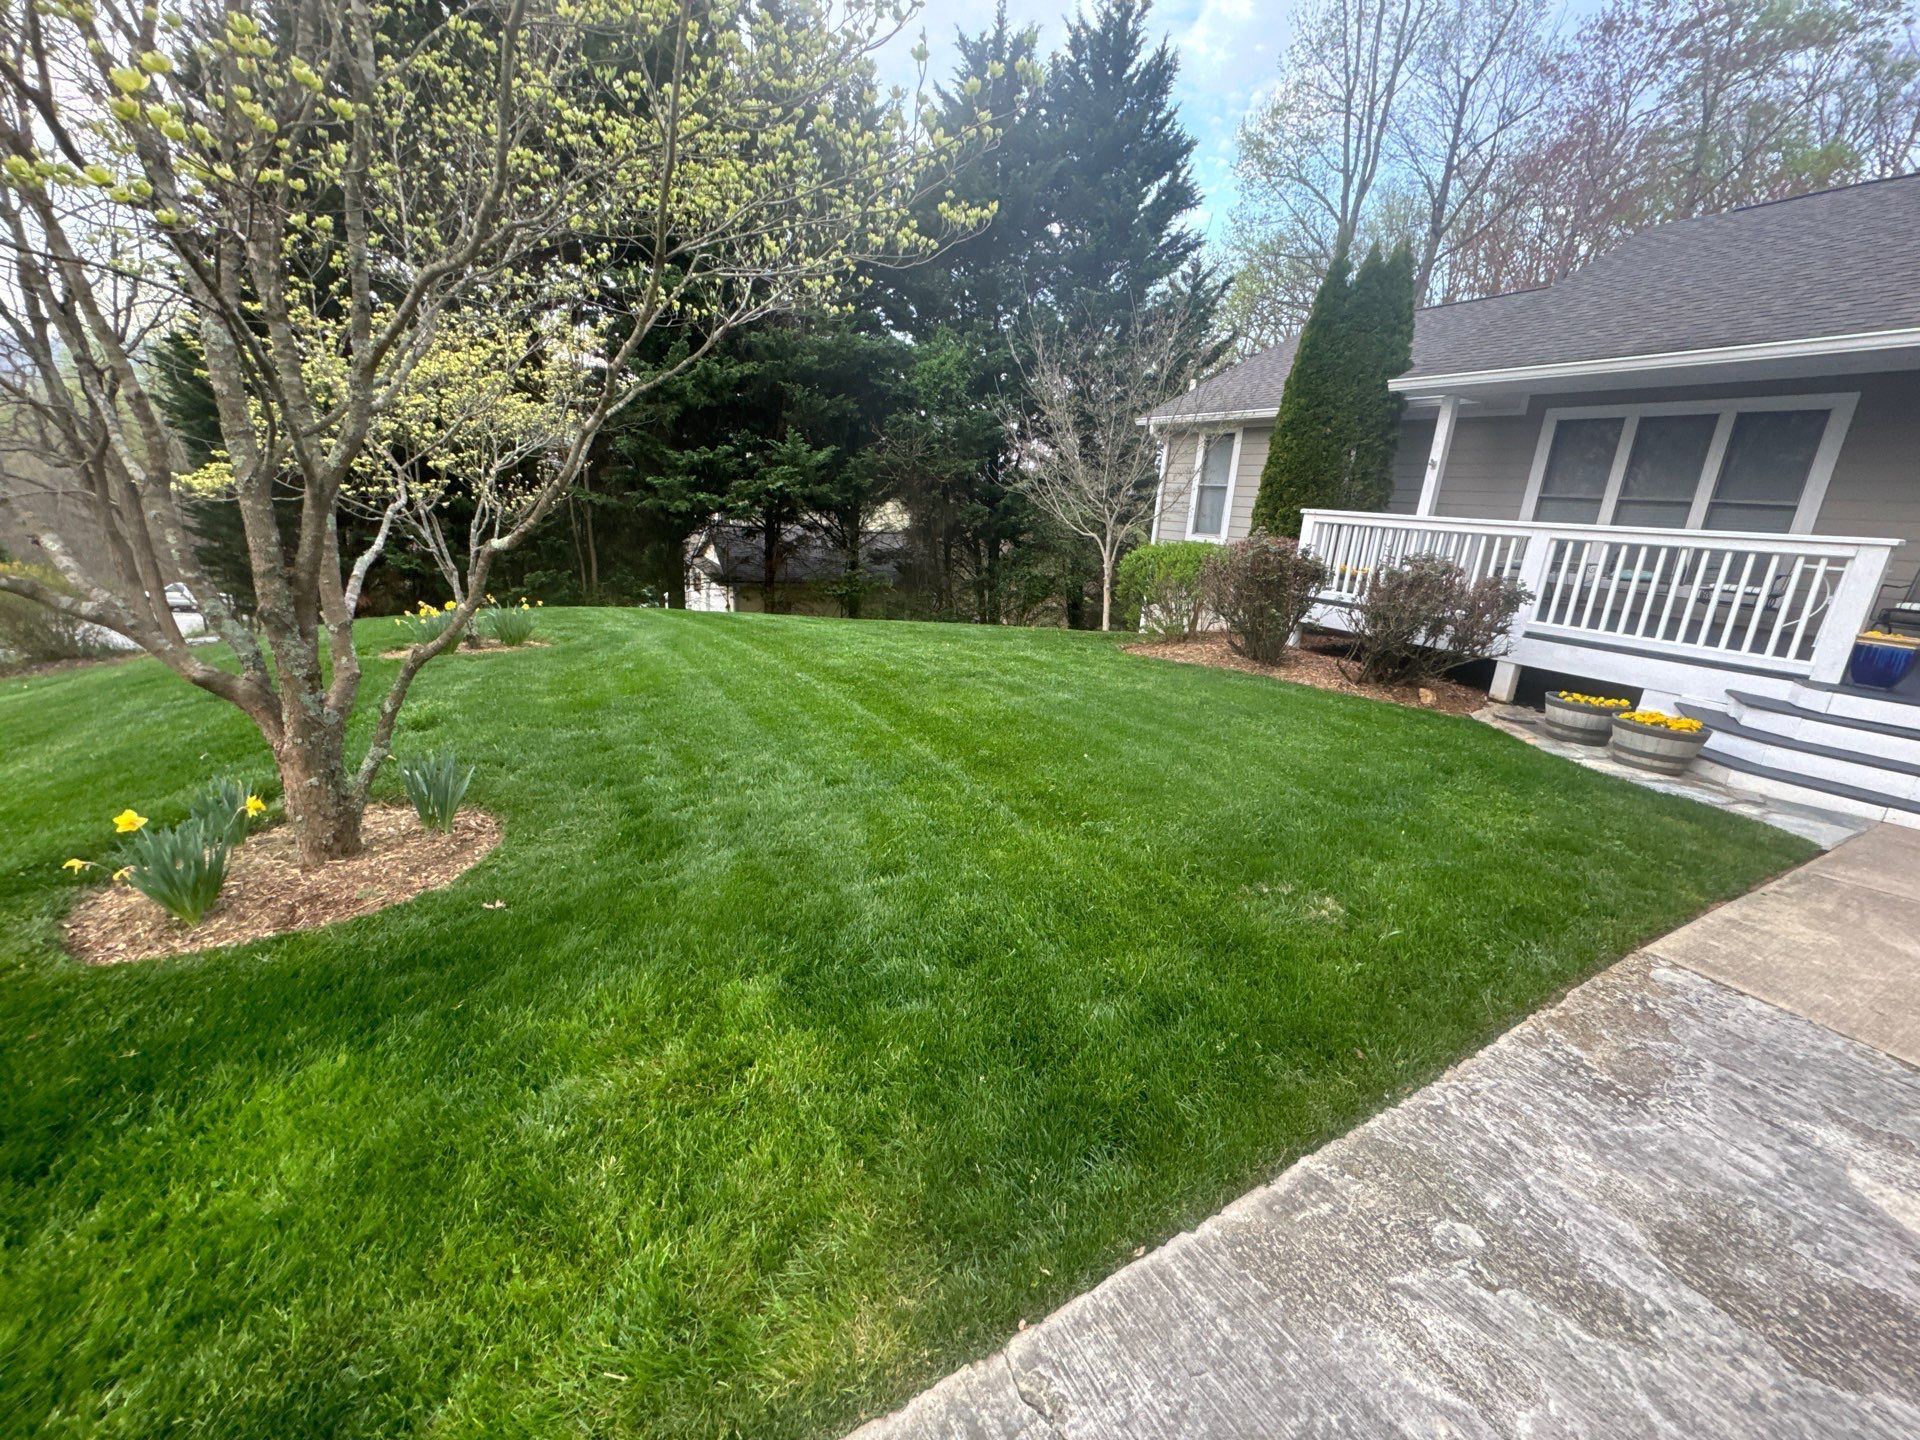 Mulching and Lawn Care for HG Landscape Plus in Asheville, NC